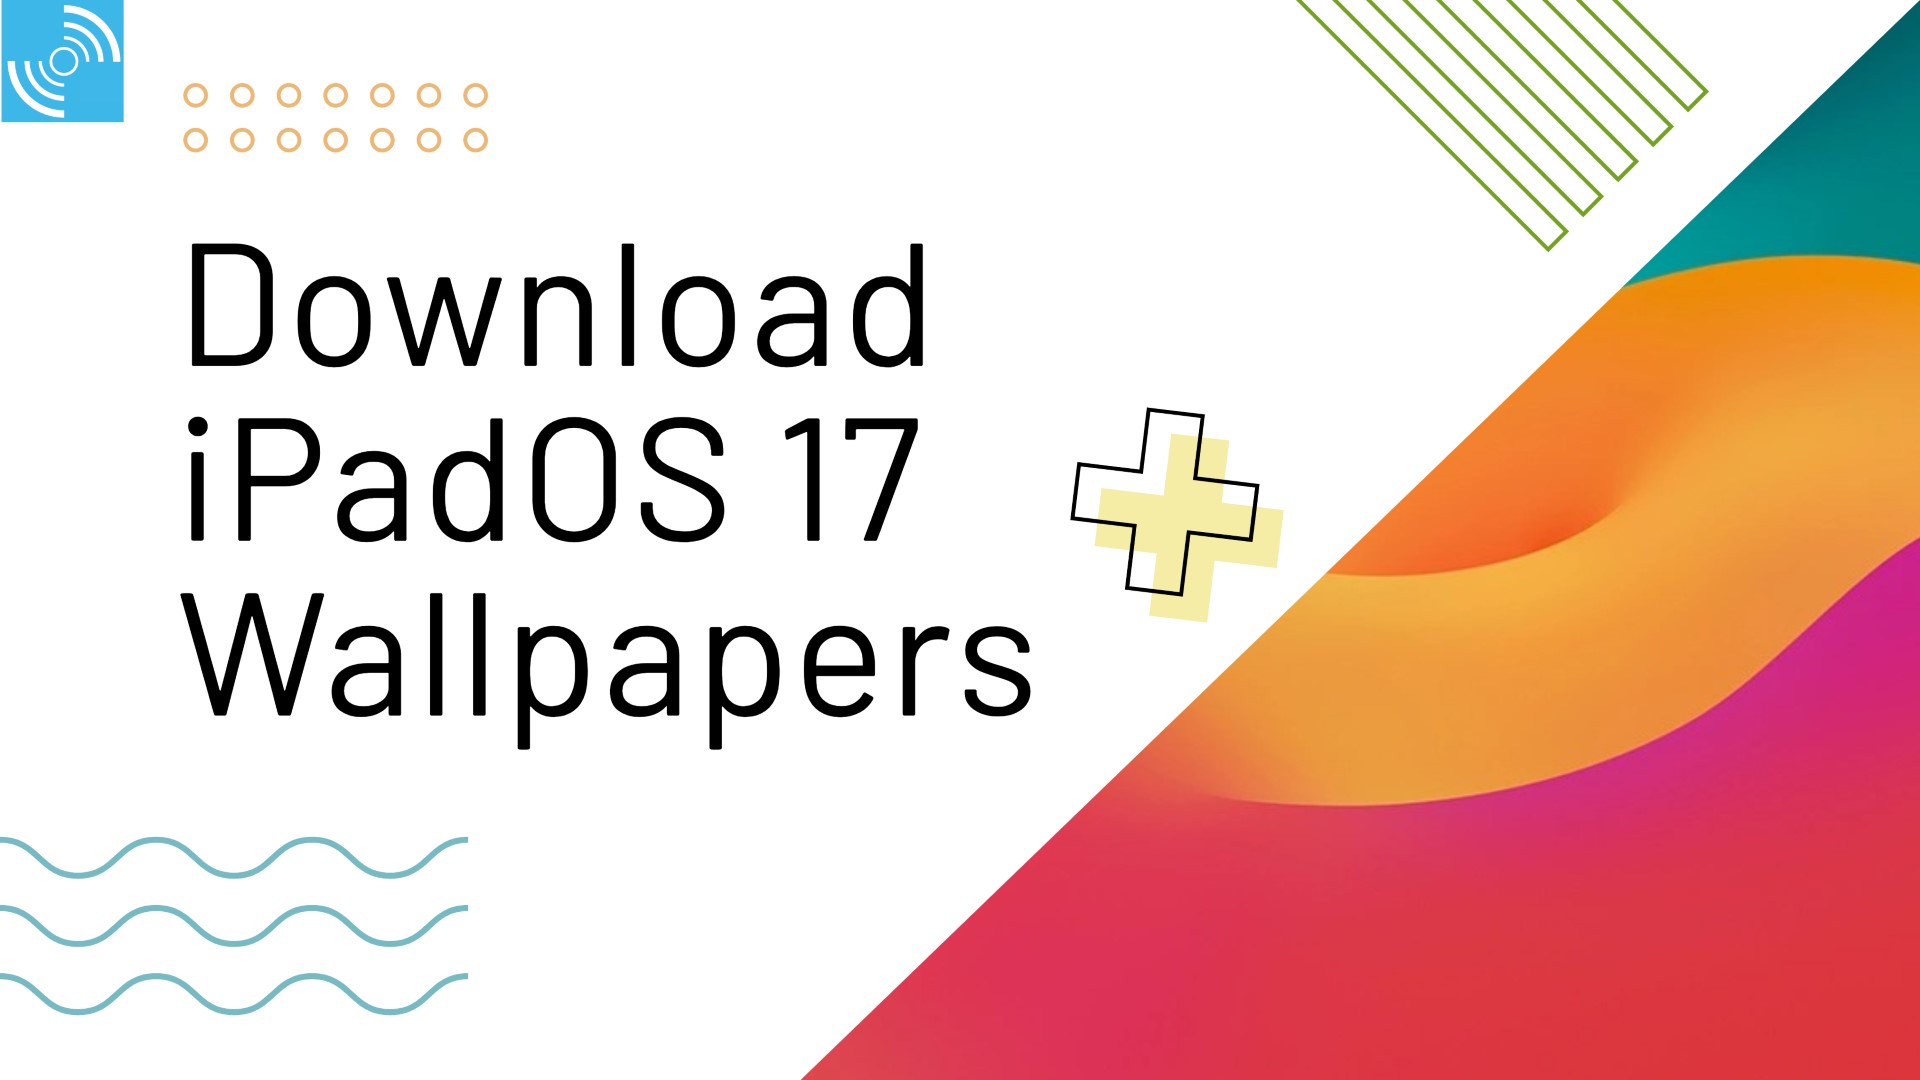 Download iPadOS 17 Wallpapers in Full Resolution - Gizmochina